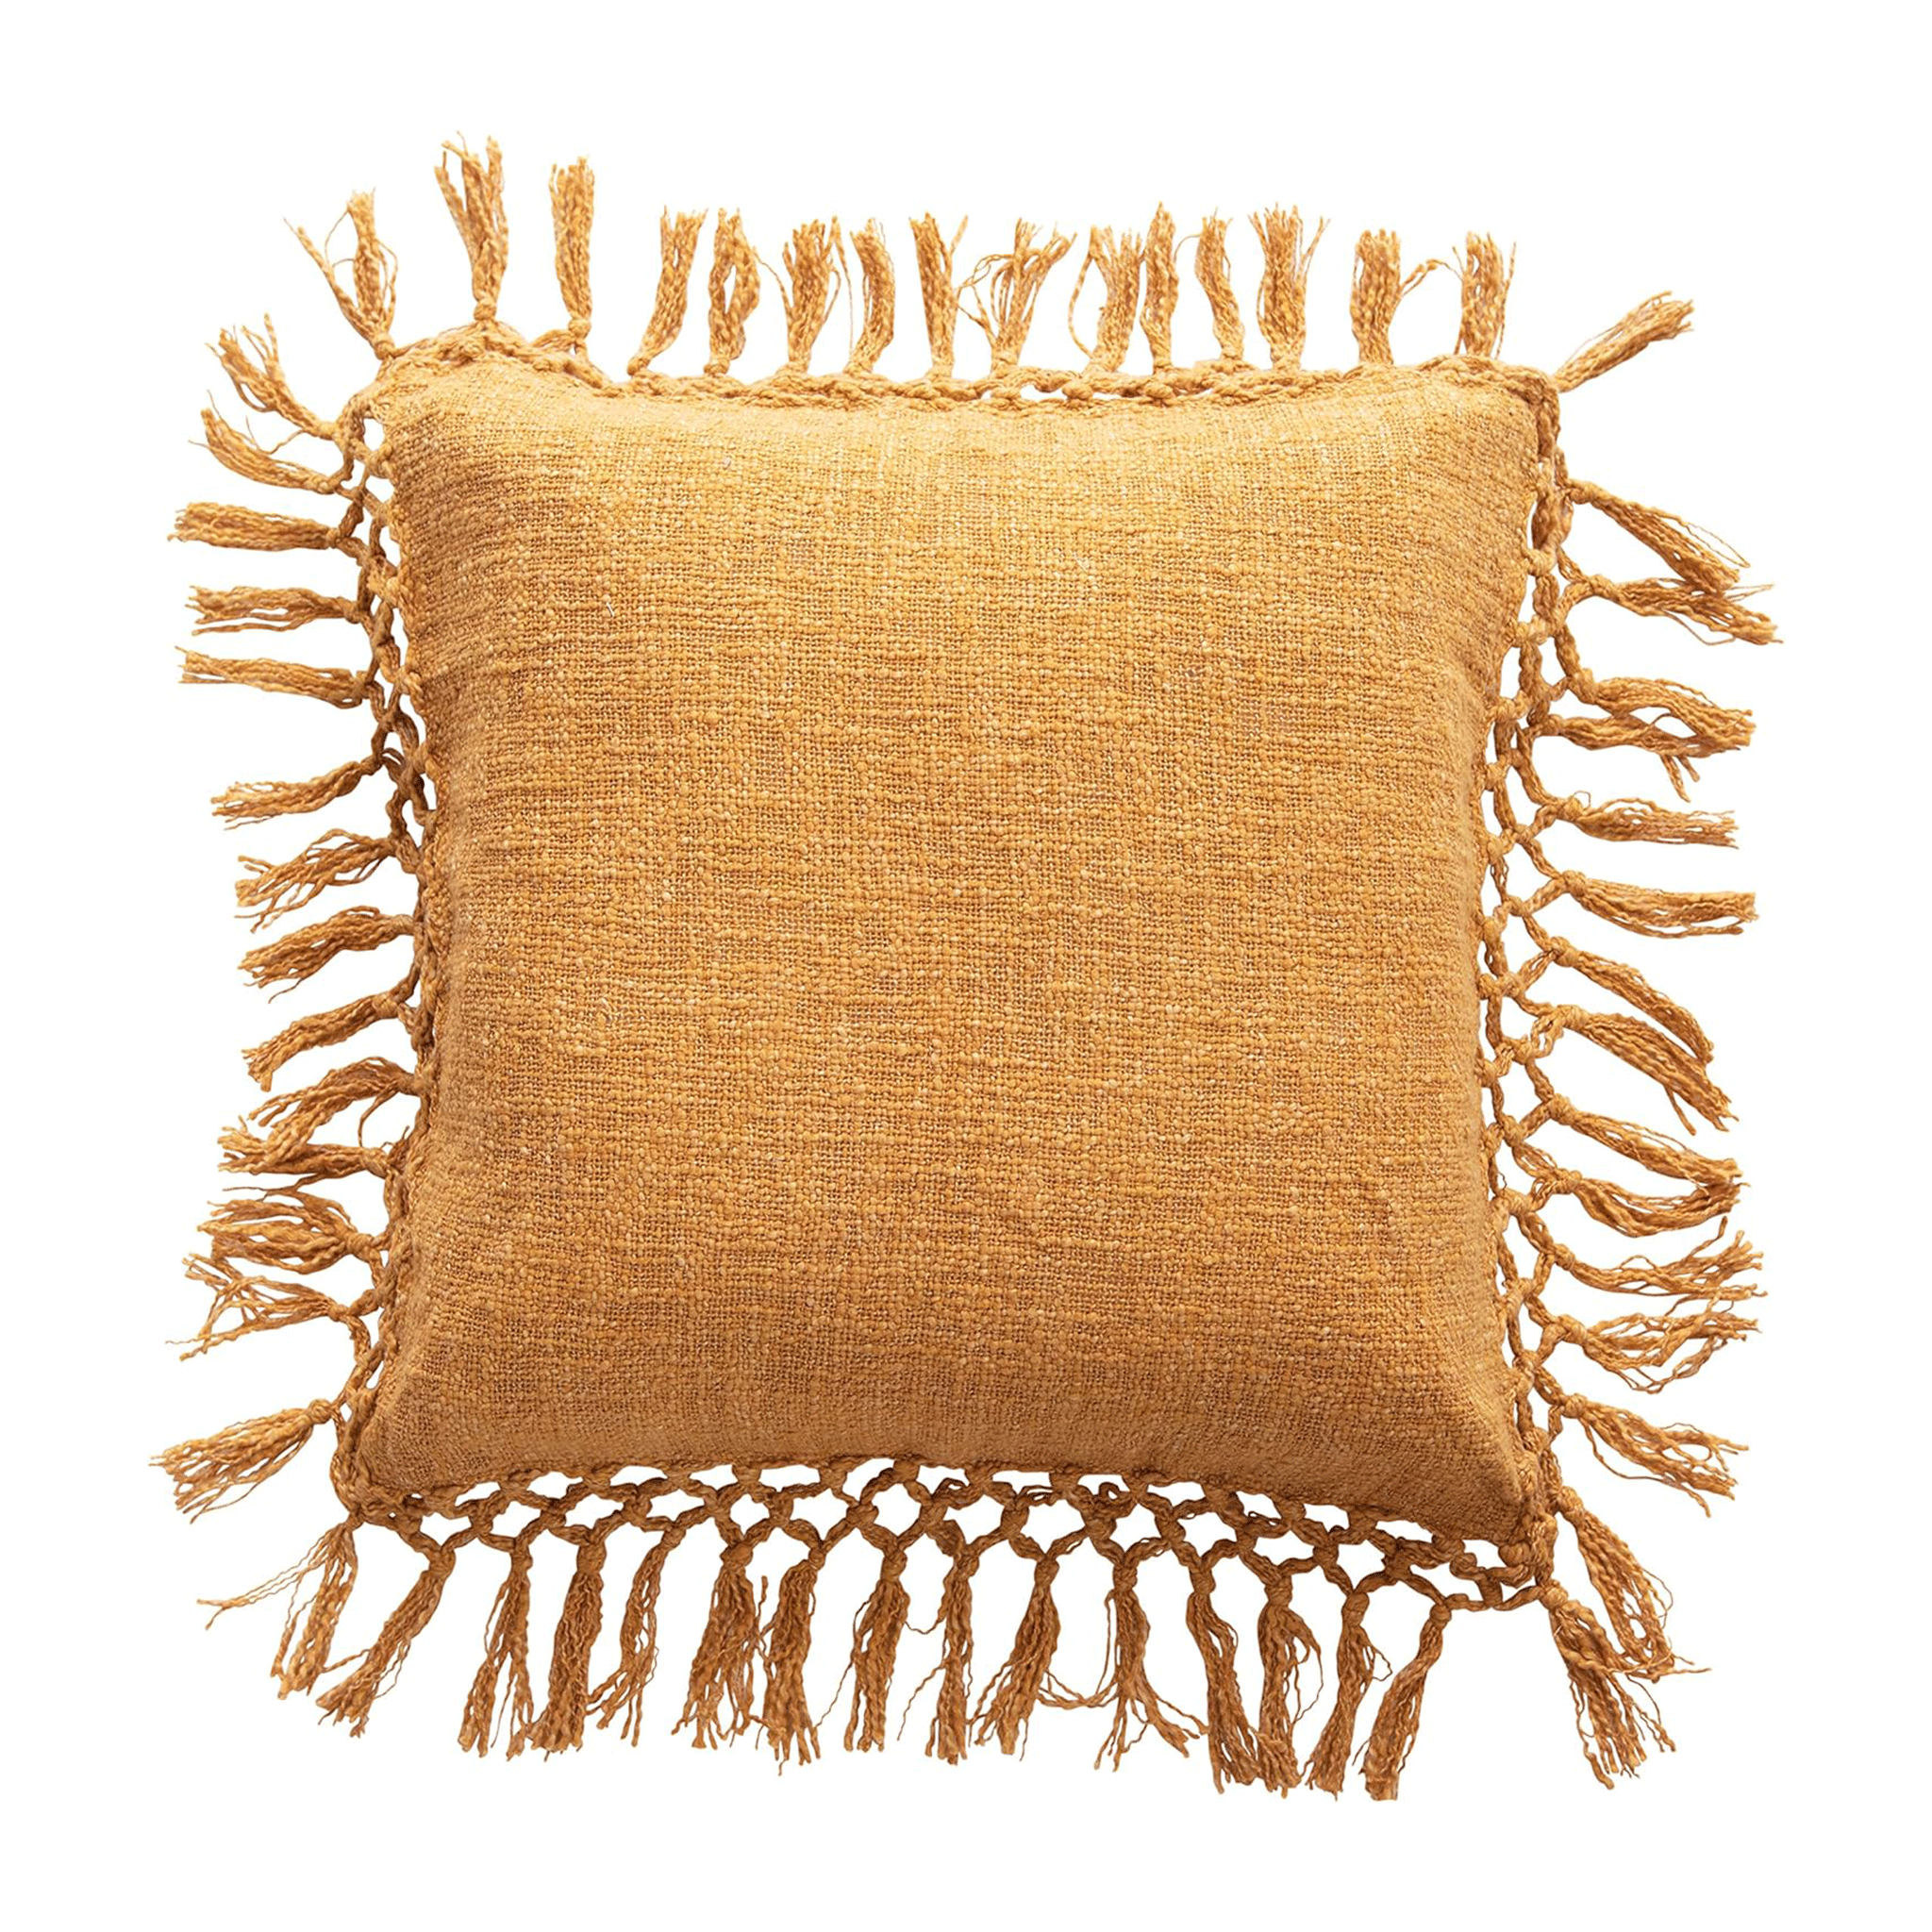 On a white background is a mustard colored cotton accent pillow with fringe around the edges. 